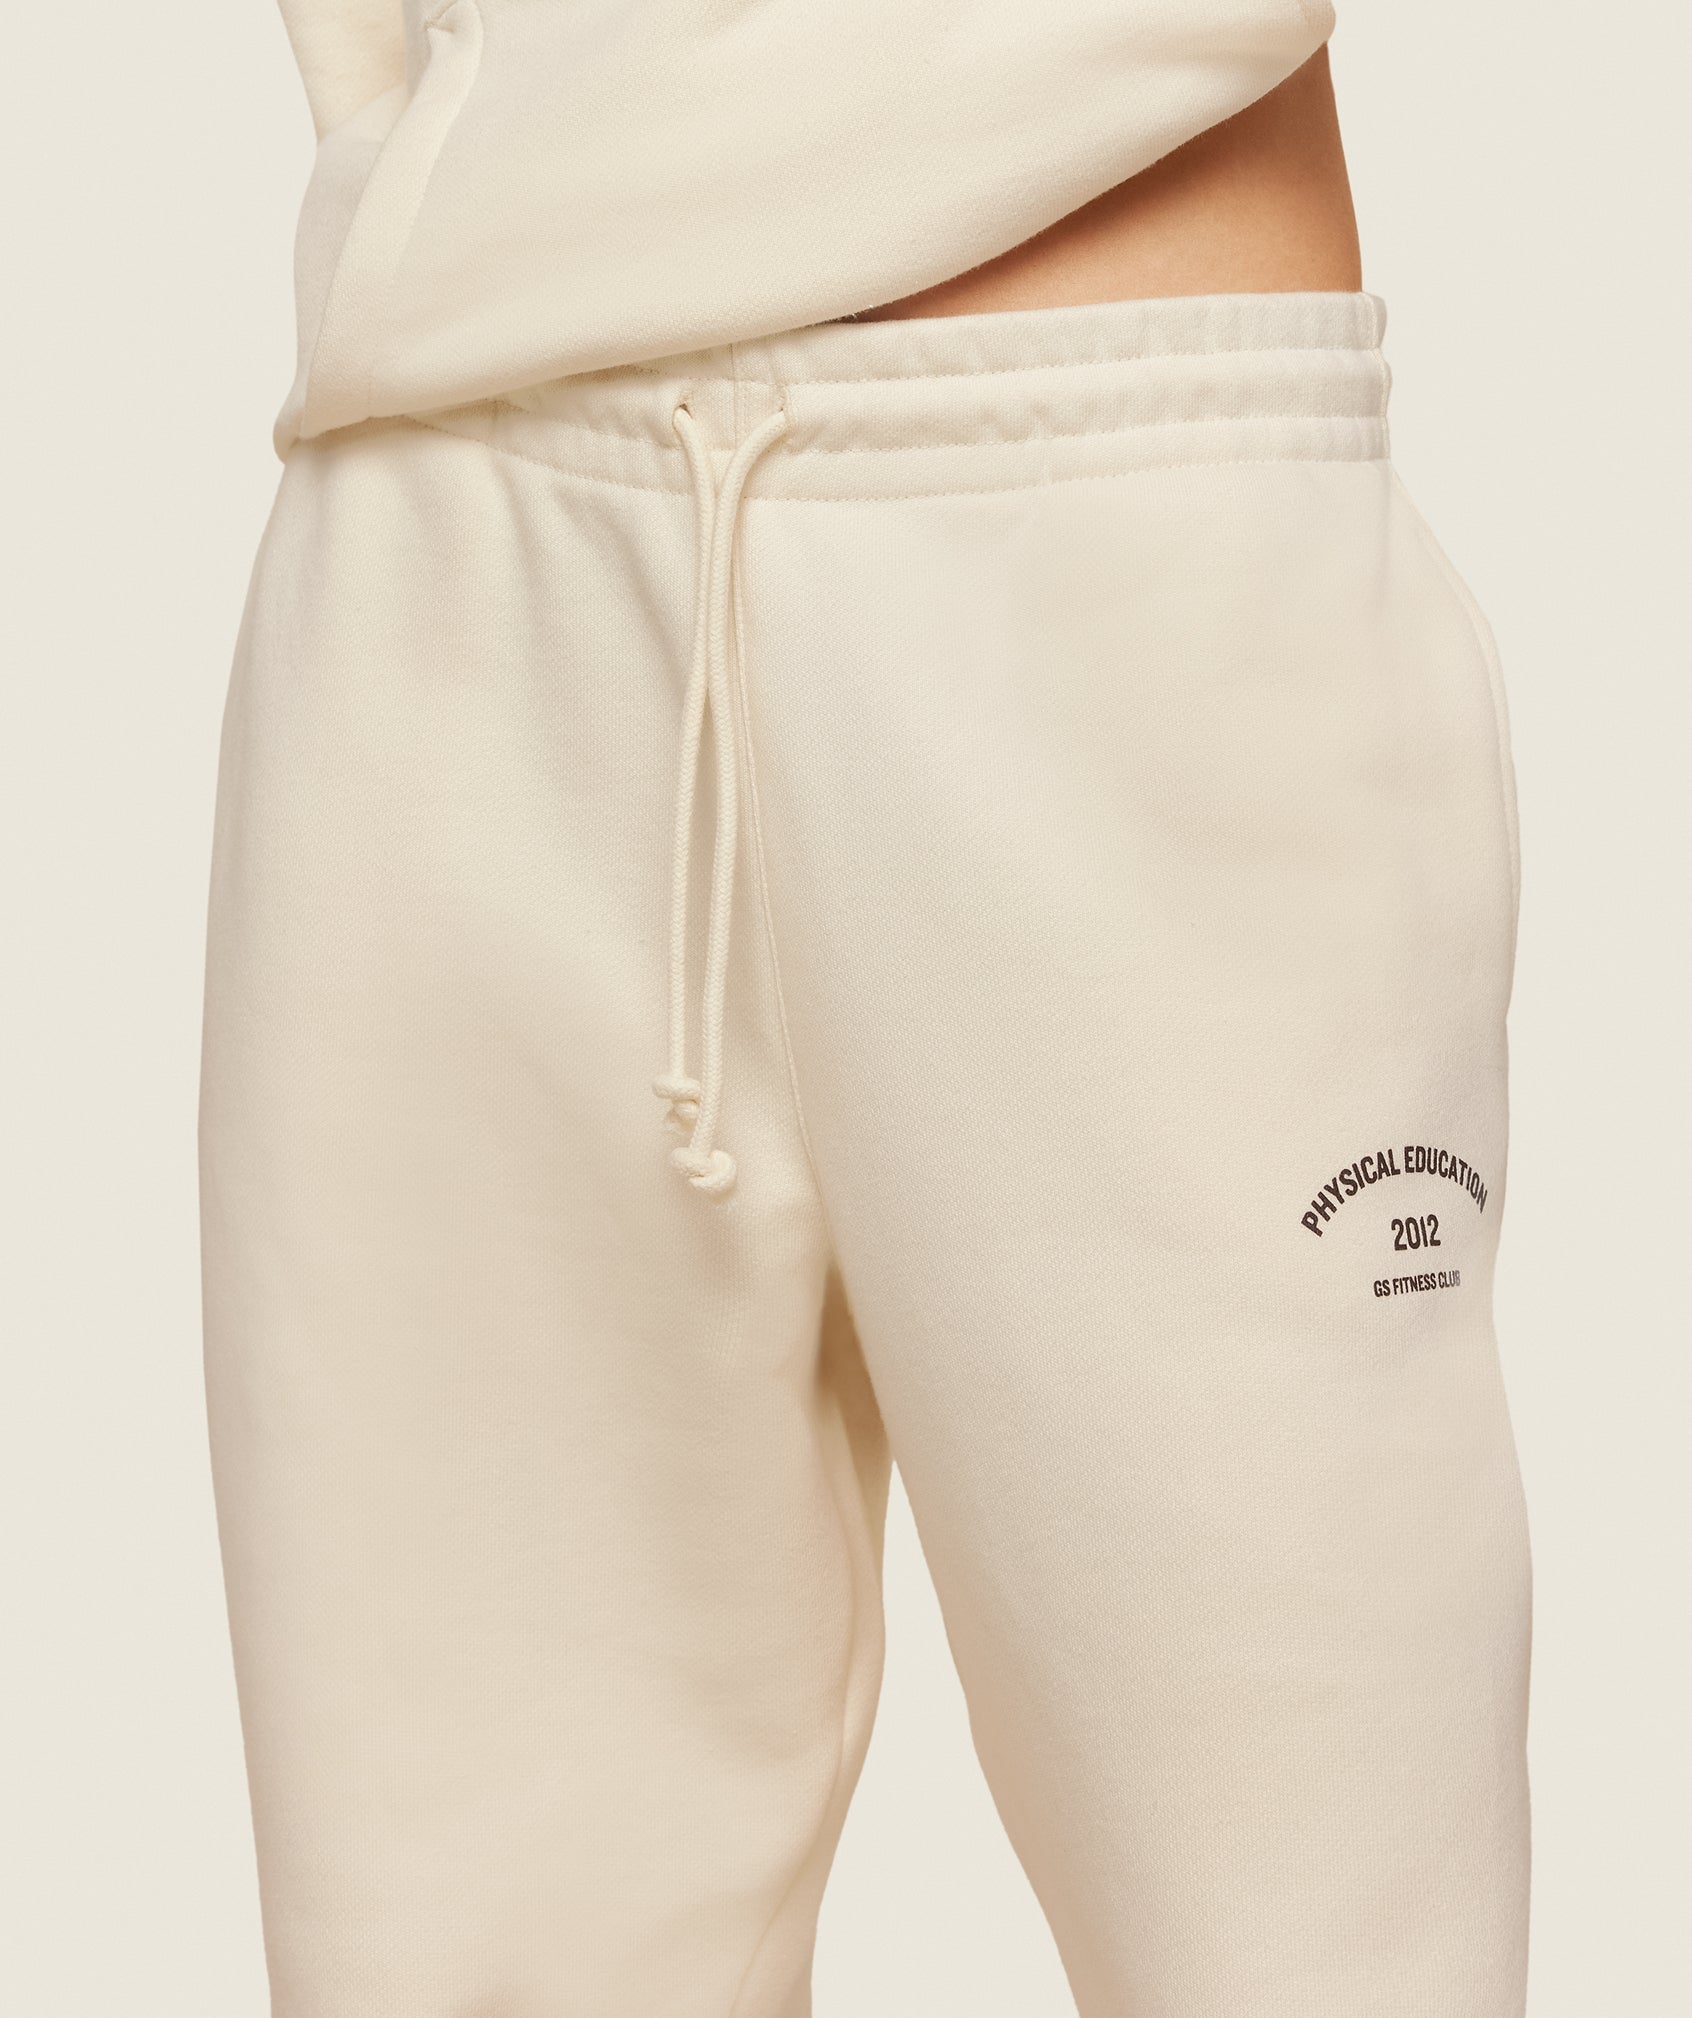 Phys Ed Graphic Sweatpants in Ecru White - view 3